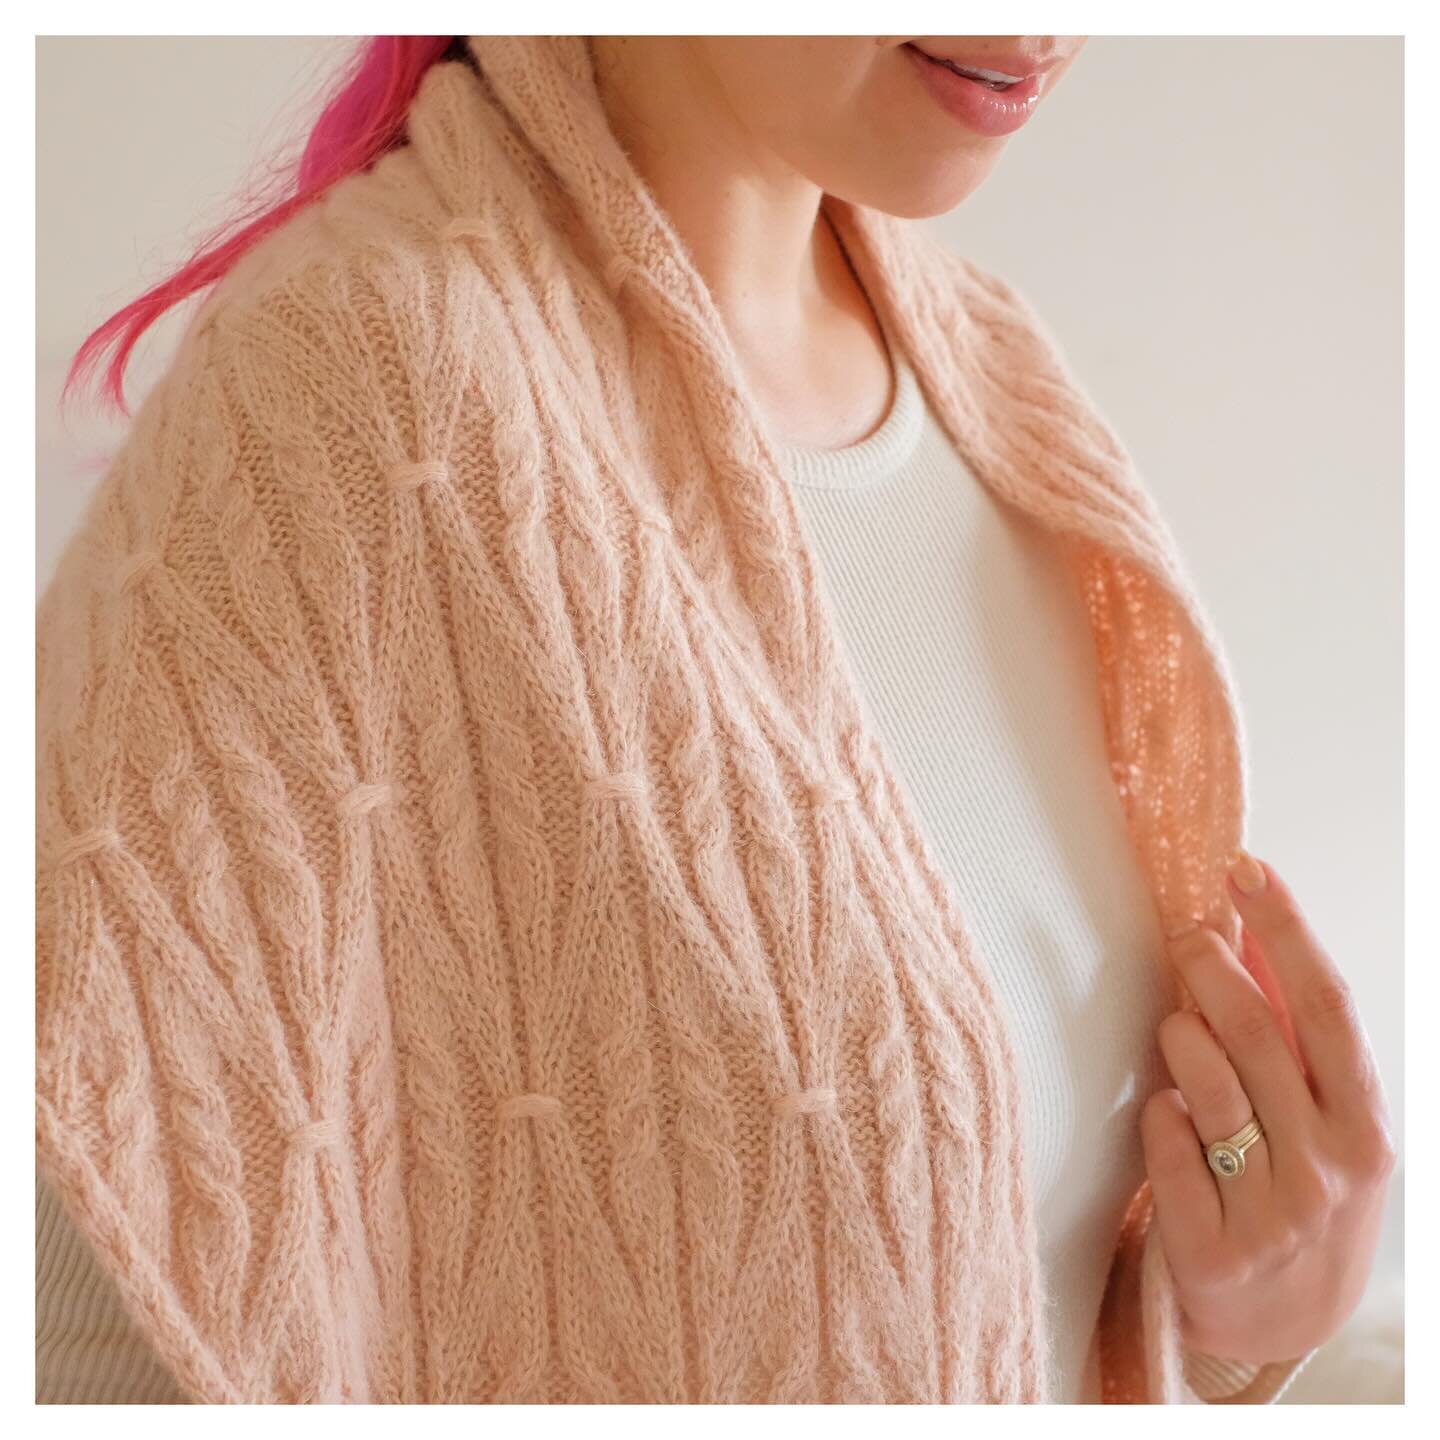 Happy Sunday!
Today is the last dear to take advantage of the intro discount for Hoya Shawl 🌿

Use the code 20off both on Ravelry and PayHip to save 20%, link in bio.
.
.
.
.
.
#lifeiscozy #hoyashawl #knittedshawl #knitshawl #knittinginspiration #we